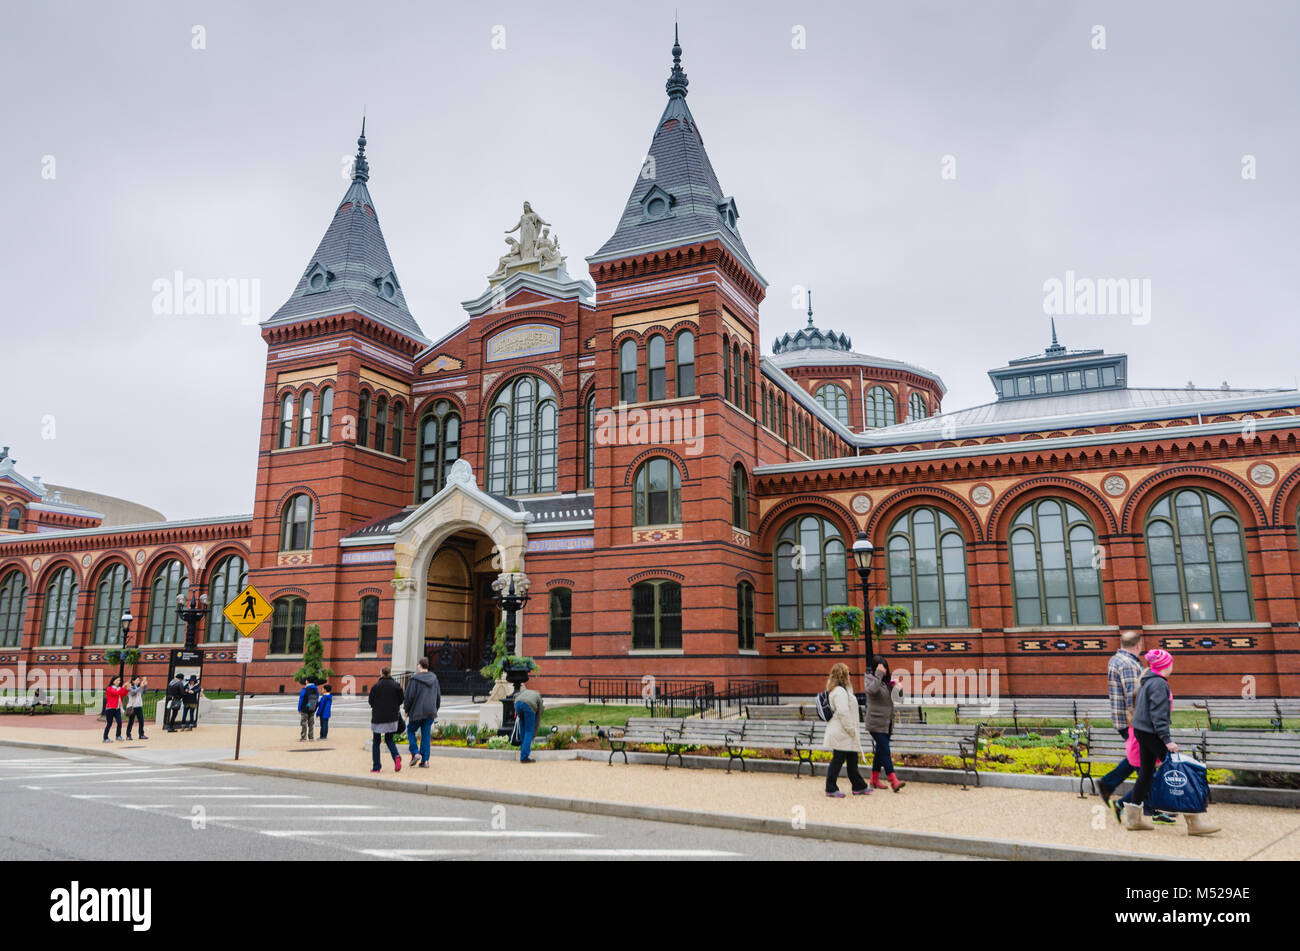 The Smithsonian Institution Building ('the Castle') located near the National Mall in Washington, D.C. Stock Photo